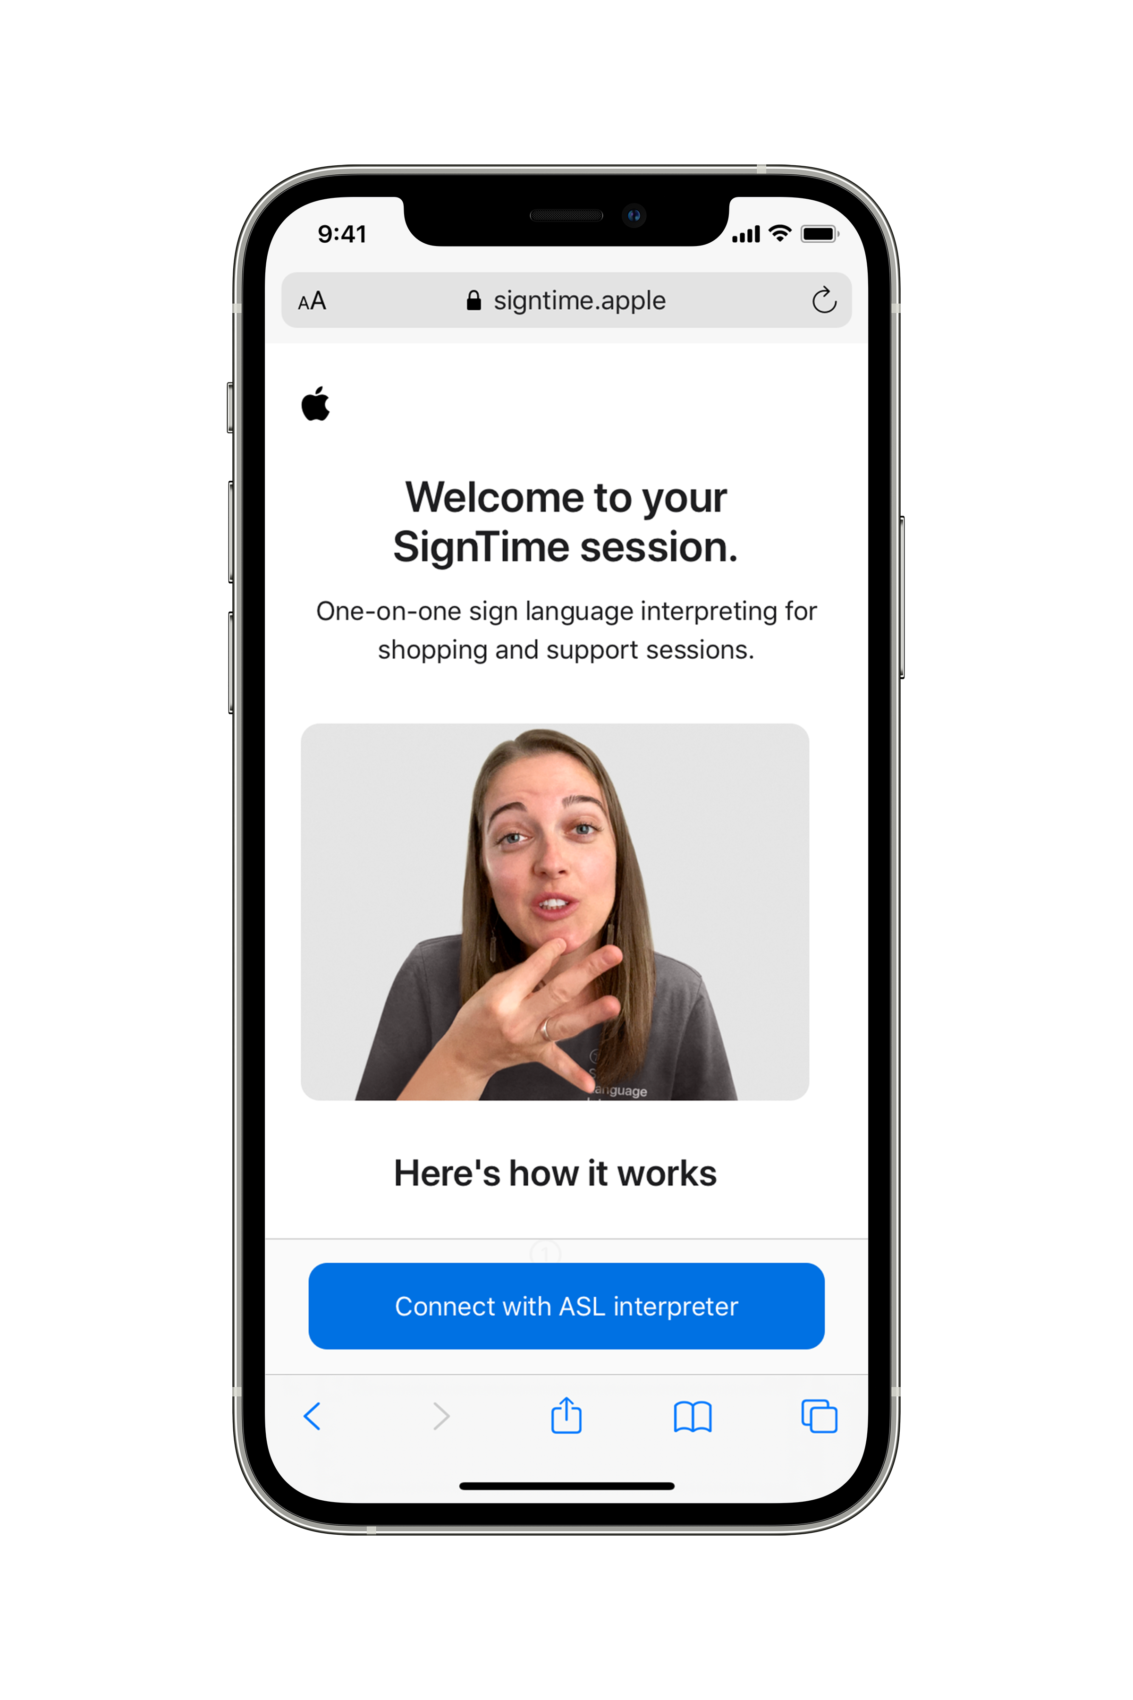 Sign language translator is available with SignTime